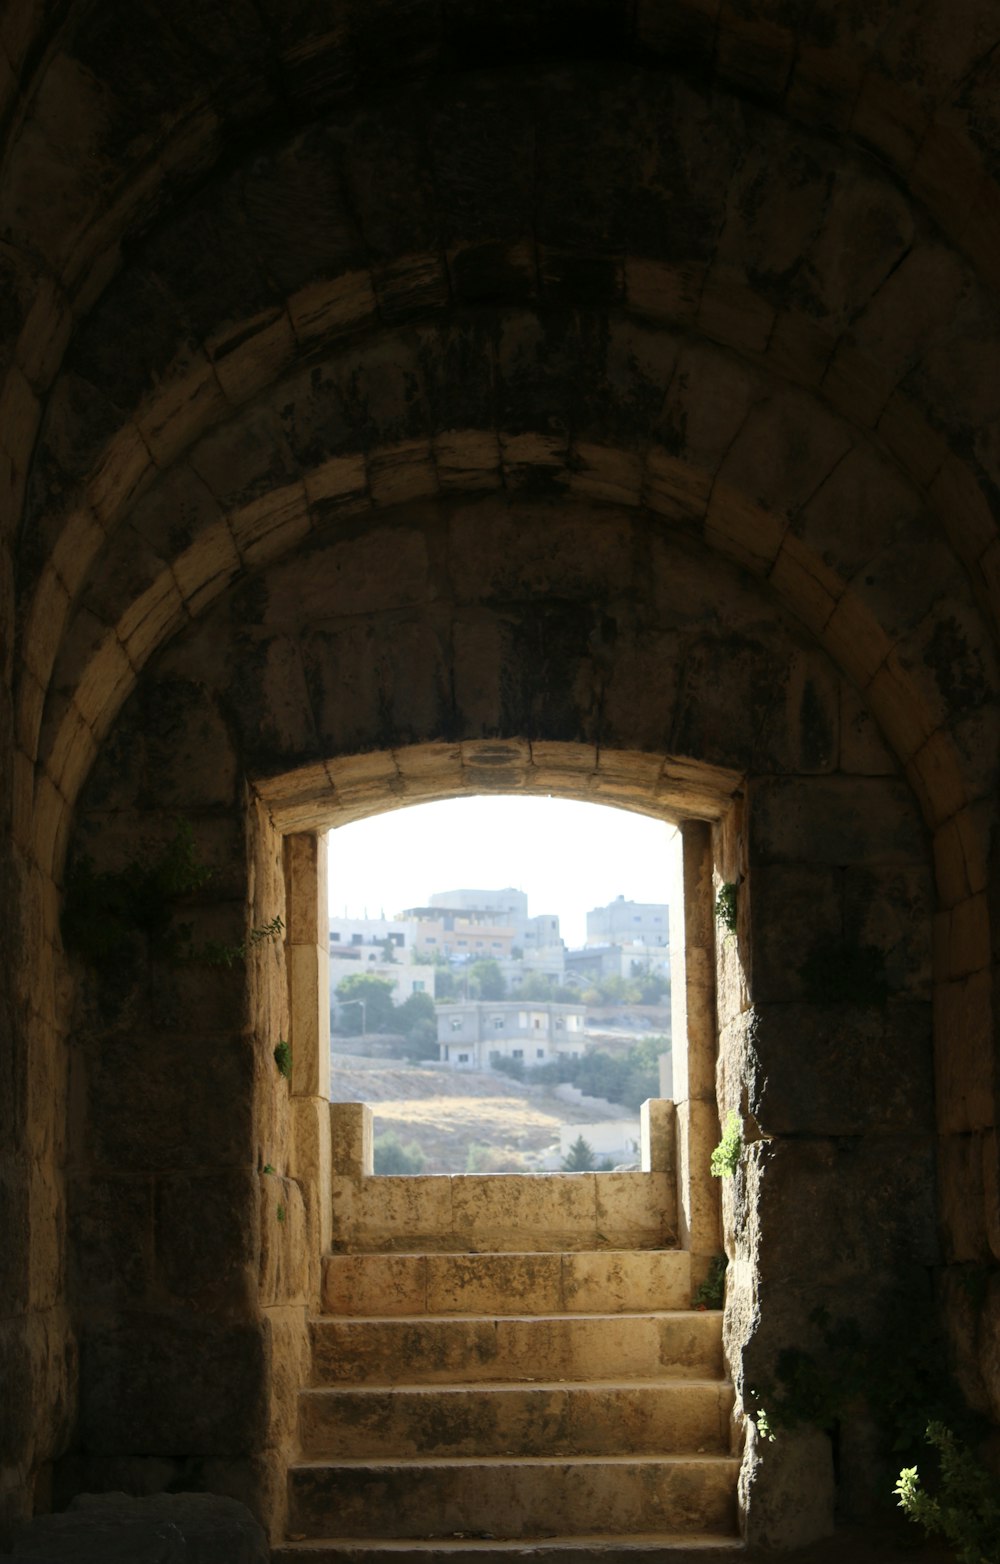 a stone archway with a view of a city through it